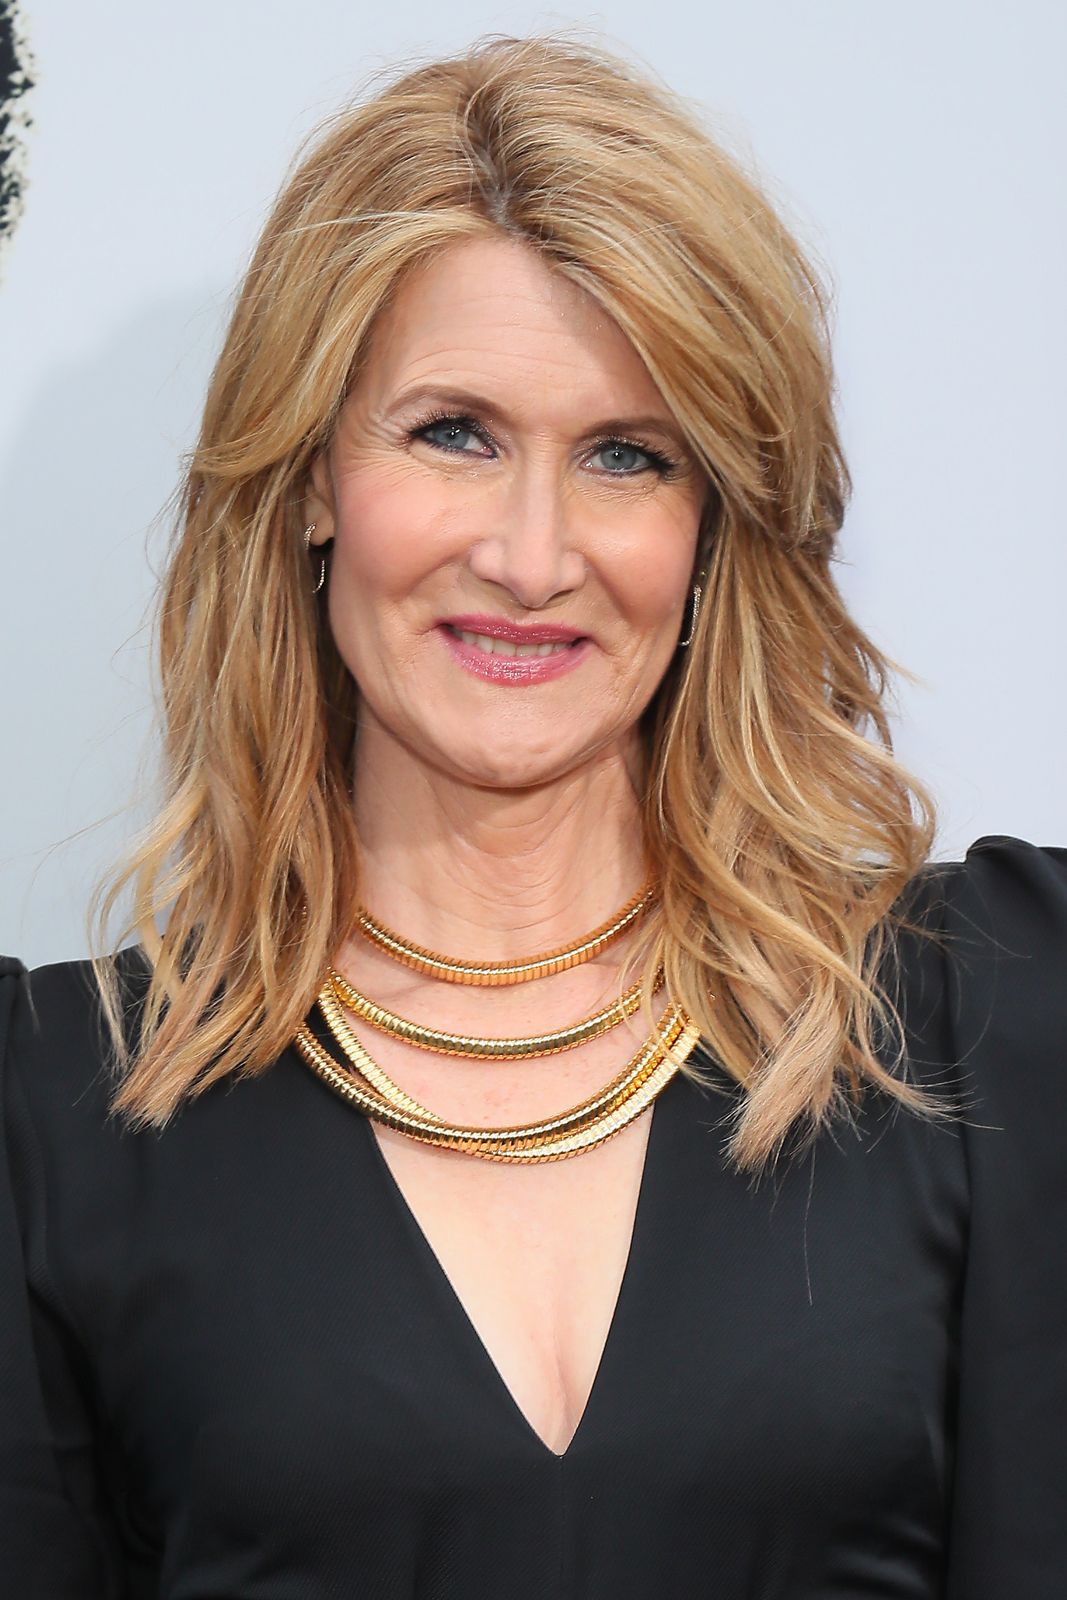 Laura Dern at the premiere of Netflix's "The Black Godfather" at Paramount Theater on June 03, 2019 in Hollywood, California. | Photo